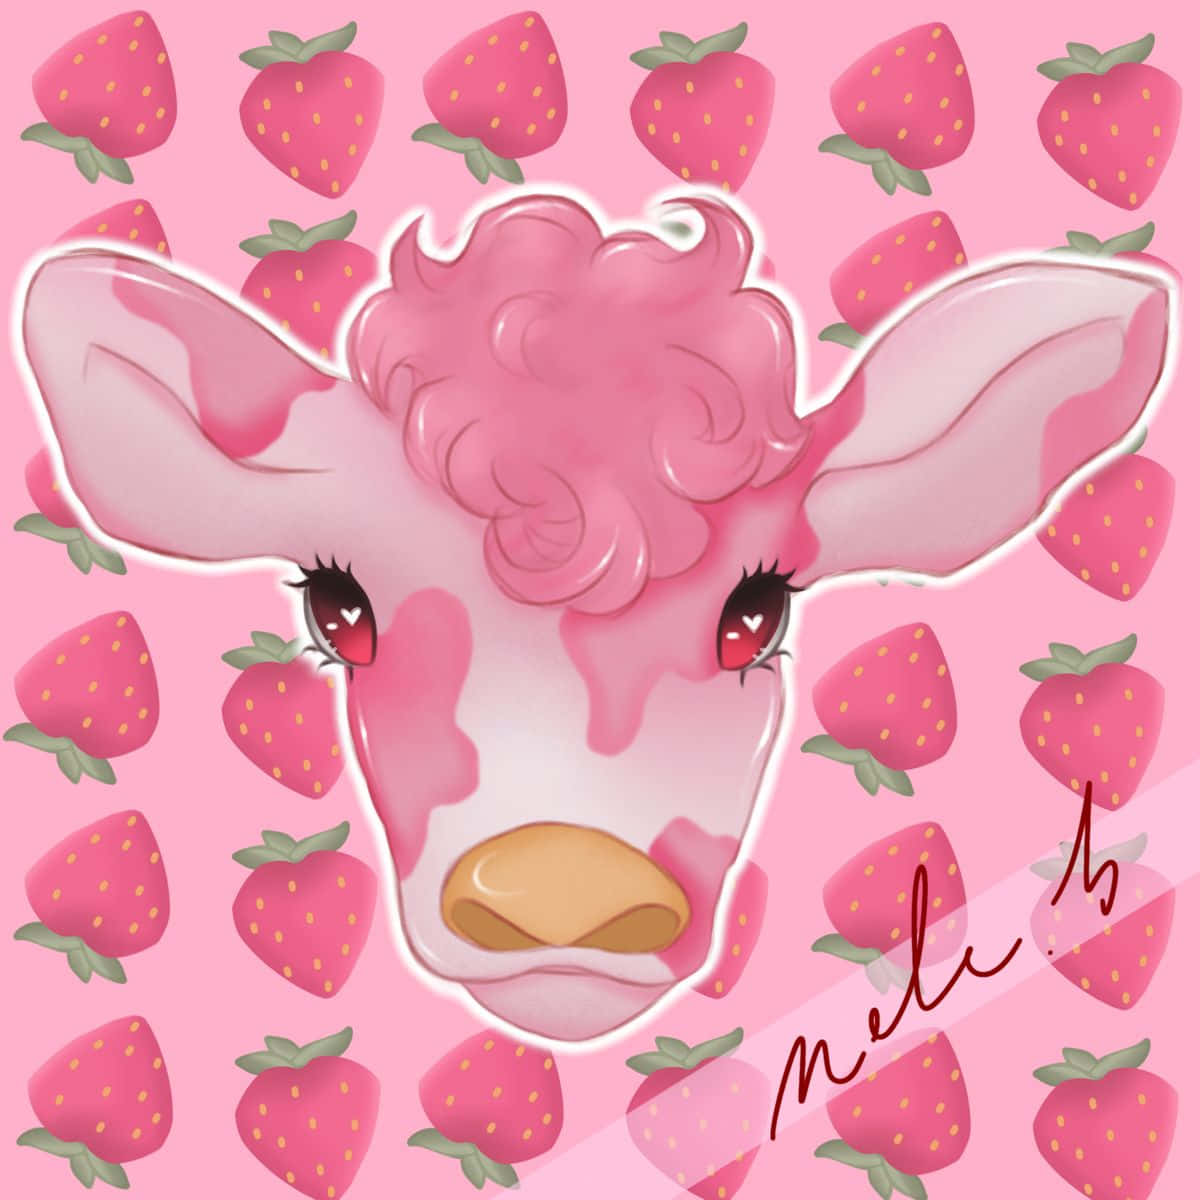 Spend some time admiring this beautiful aesthetic cow! Wallpaper